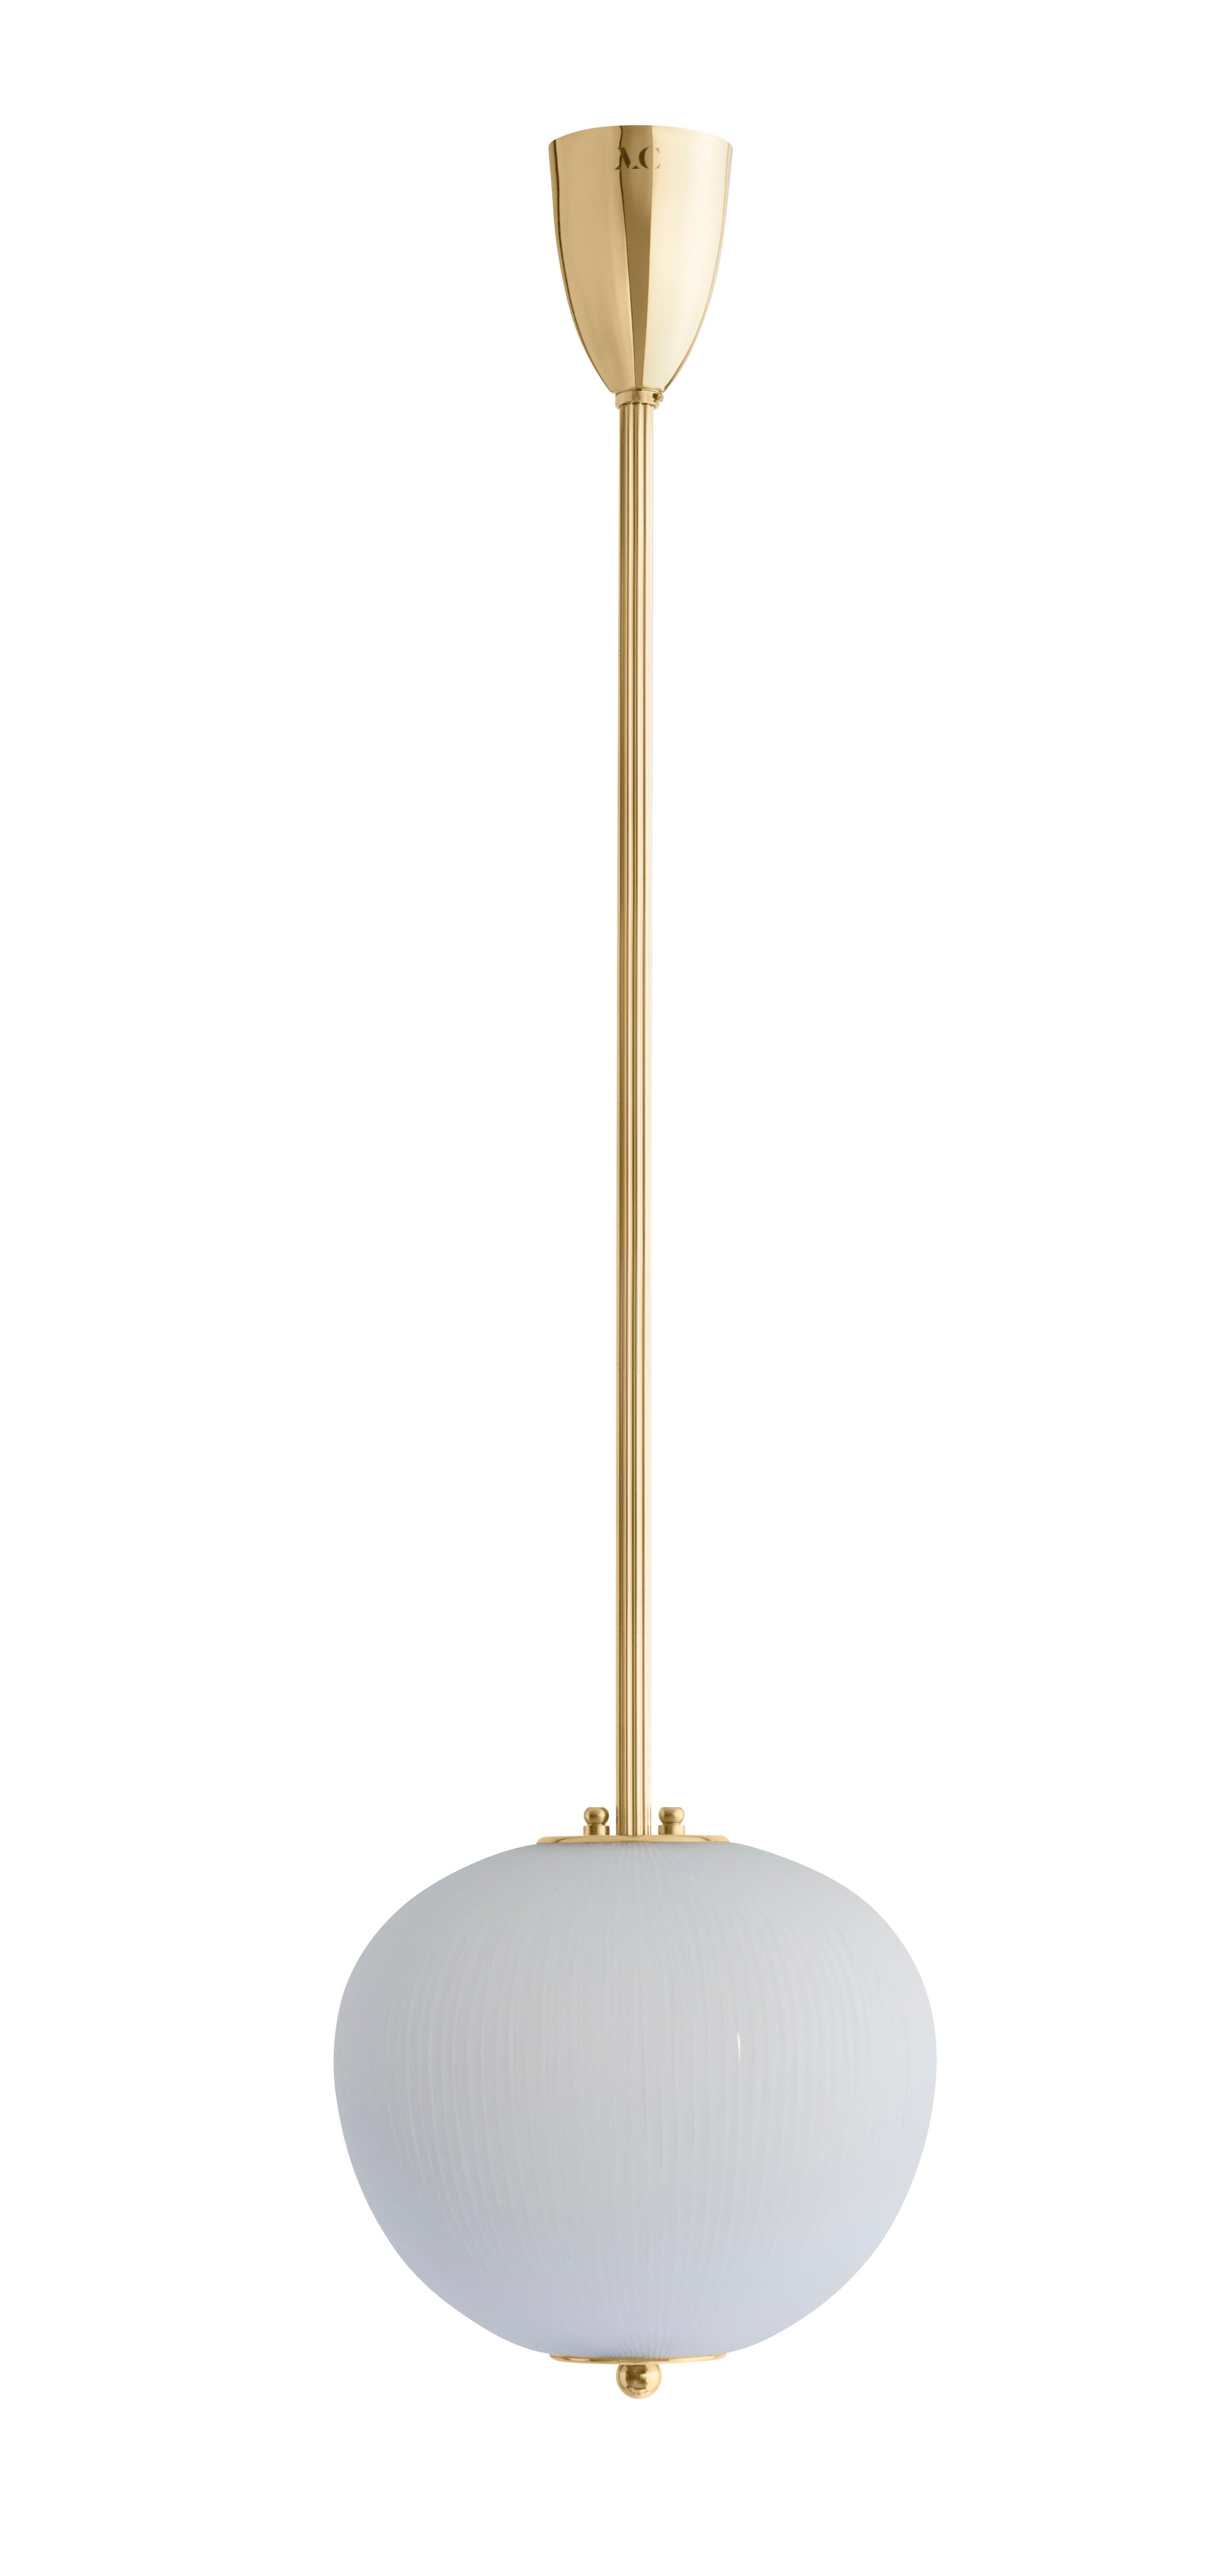 Pendant China 03 by Magic Circus Editions
Dimensions: H 90 x W 26.2 x D 26.2 cm, also available in H 110, 130, 150, 175, 190
Materials: Brass, mouth blown glass sculpted with a diamond saw
Colour: rich grey

Available finishes: Brass,